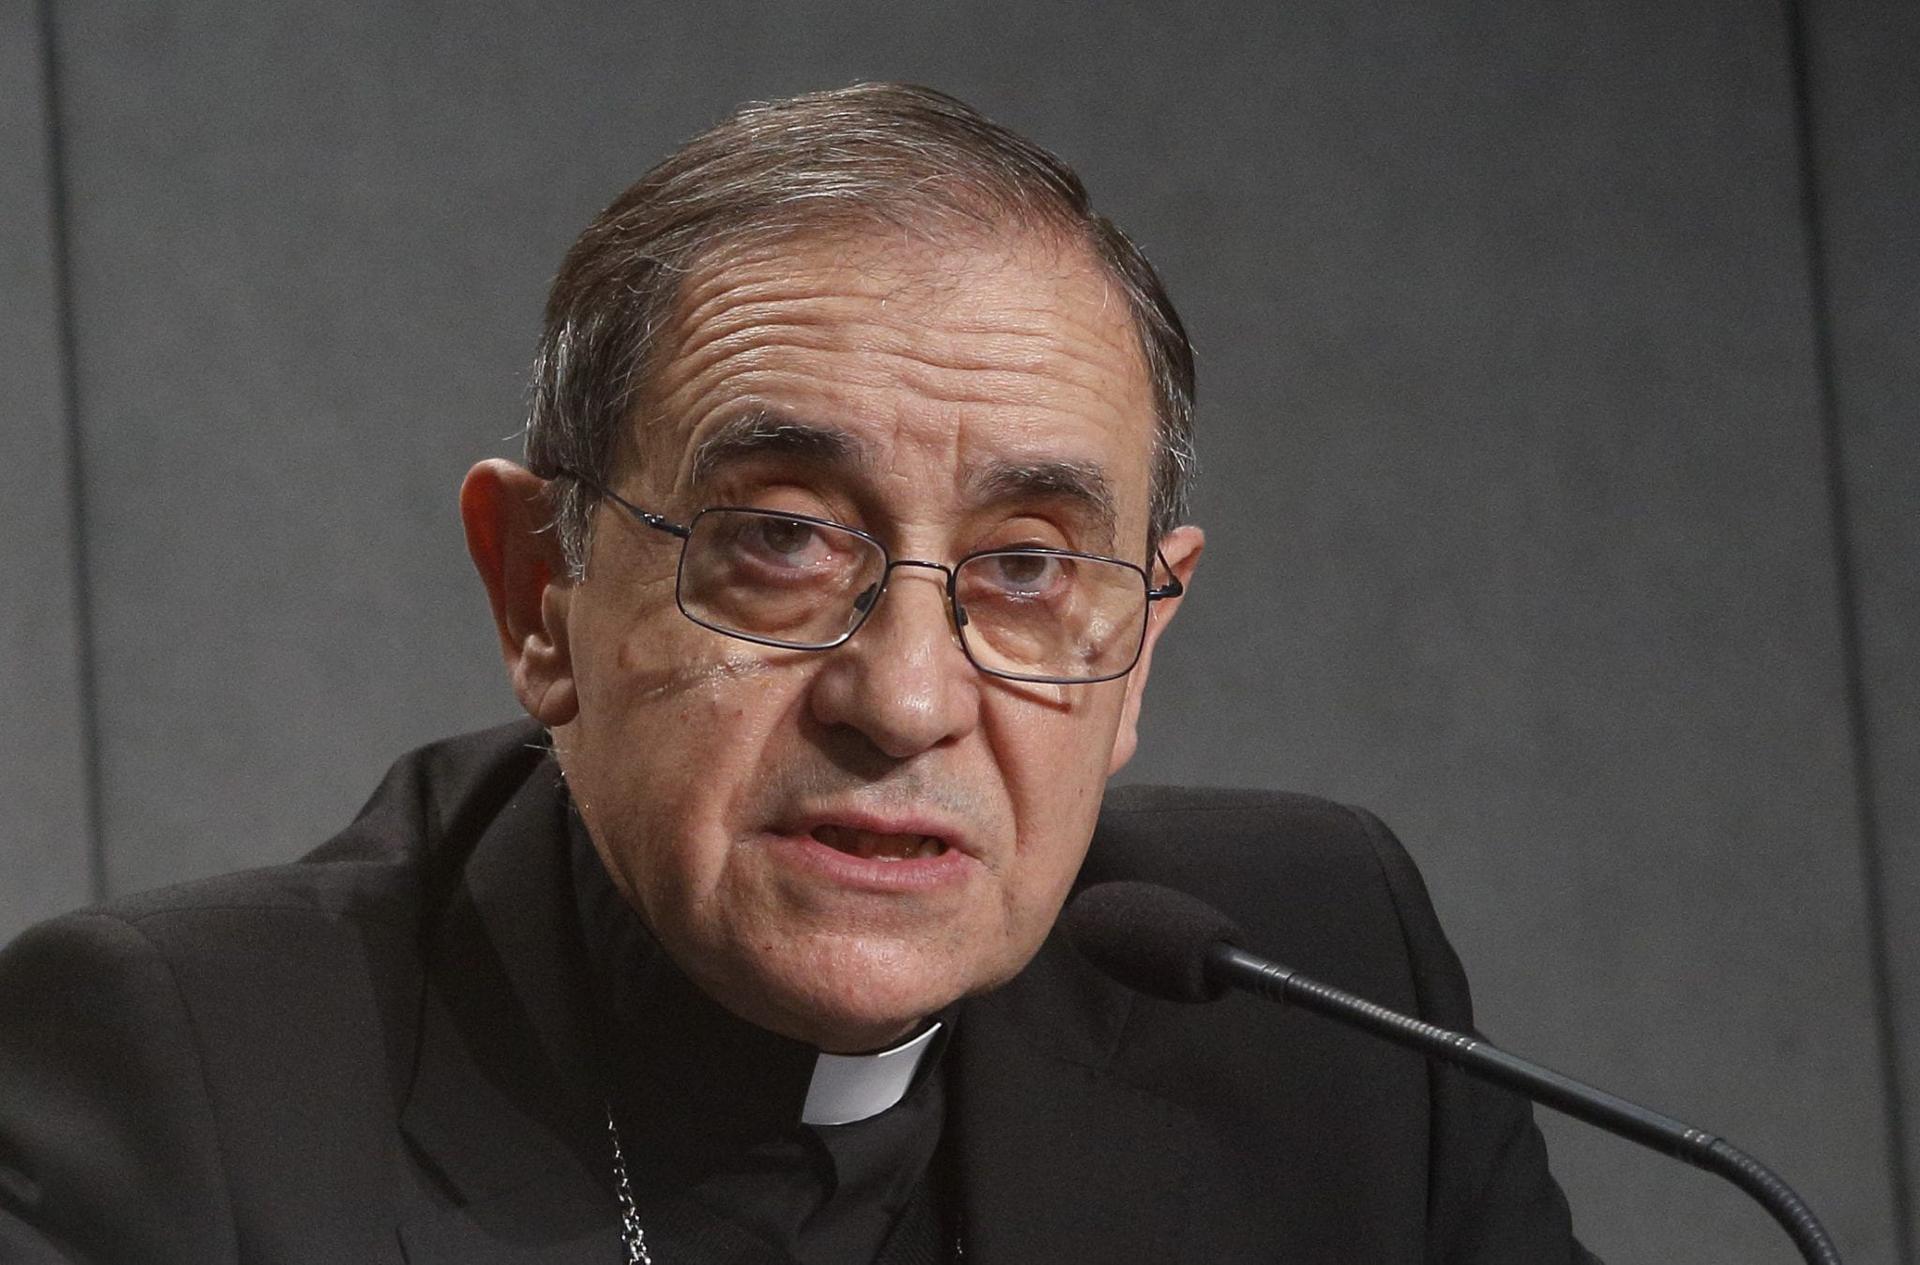 ‘Pontifical secret’ still has role despite its abolition in sex abuse cases, expert says